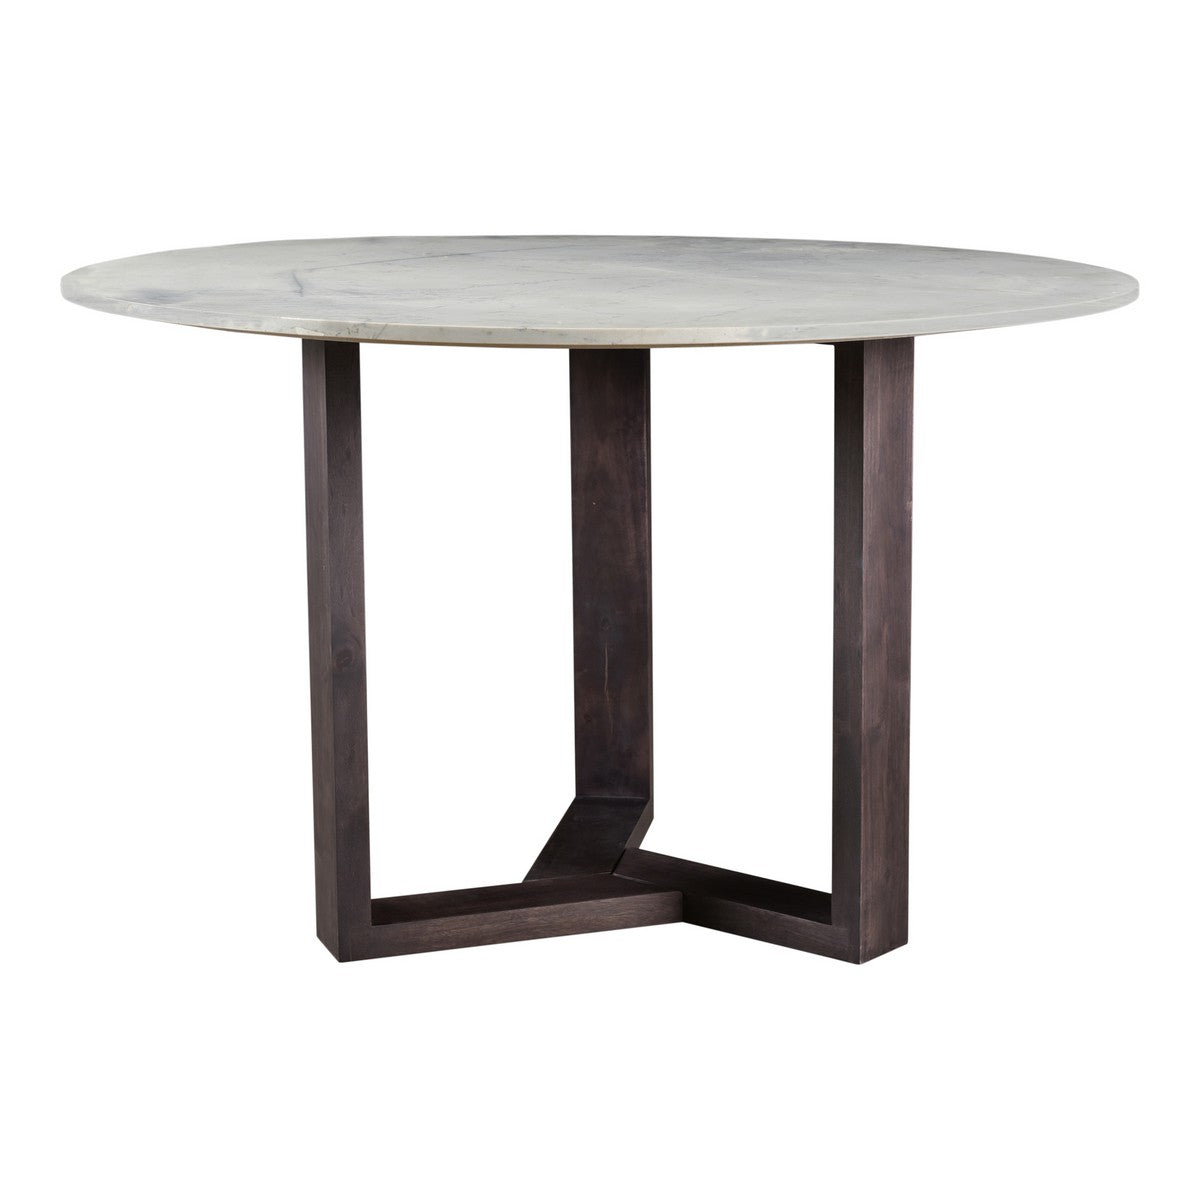 Moe's Home Collection Jinxx Dining Table Charcoal Grey - JD-1009-07